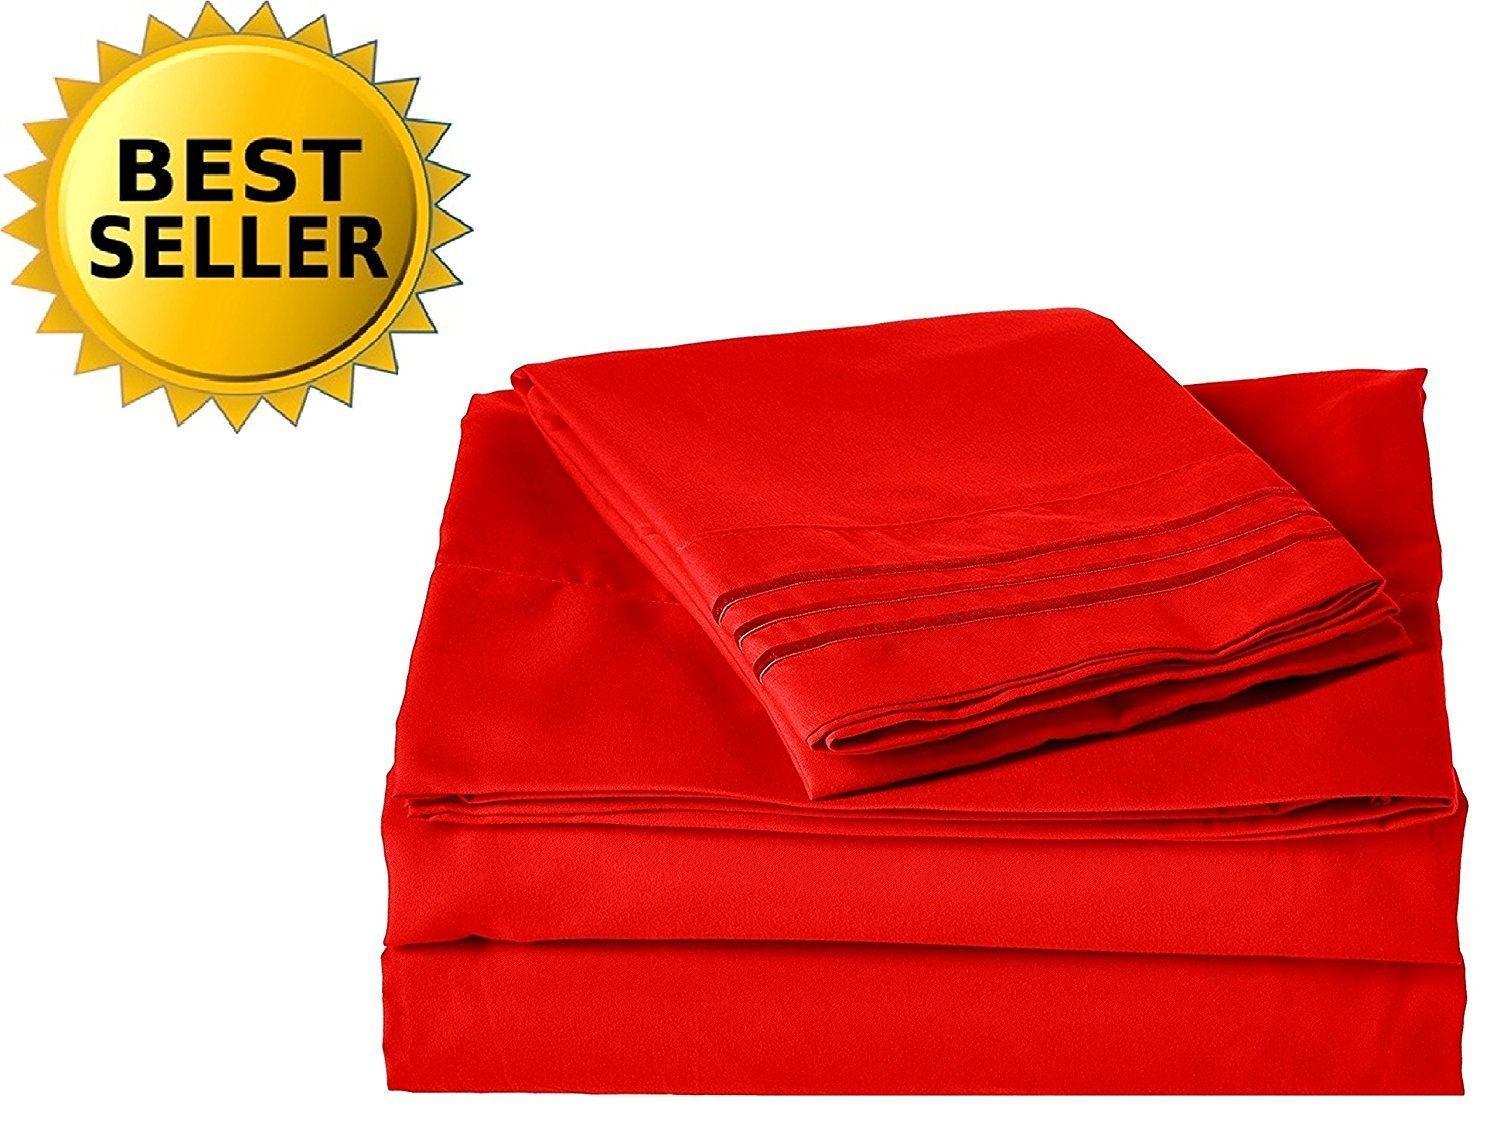 Book Cover Celine Linen 2-Piece Pillowcases 1800 Series Egyptian Quality Super Soft Wrinkle Resistant & Fade Resistant Beautiful Design on Pillowcases , King Size, Red